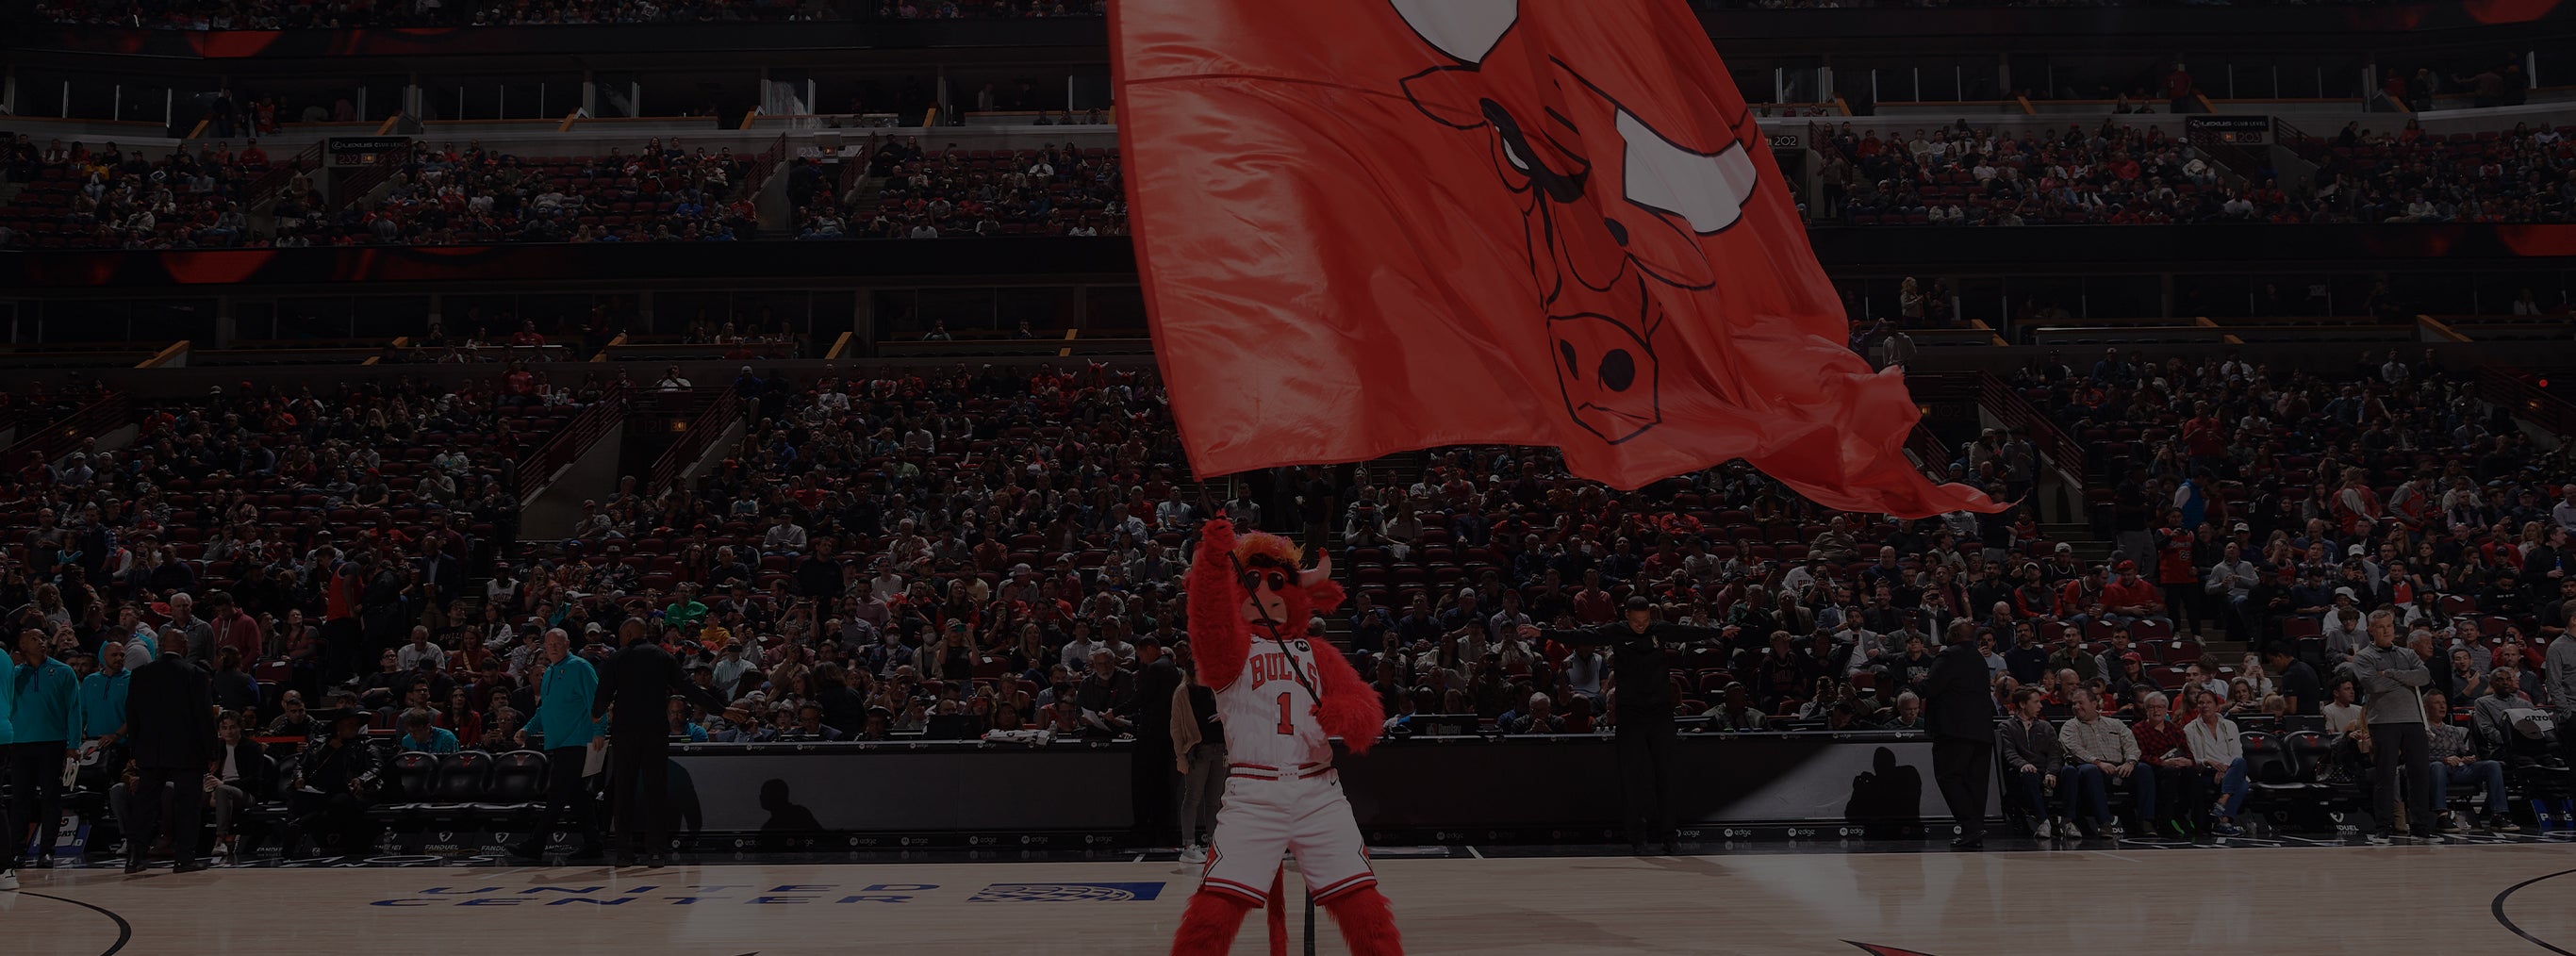 Official Chicago Bulls Player Apparel – Official Chicago Bulls Store